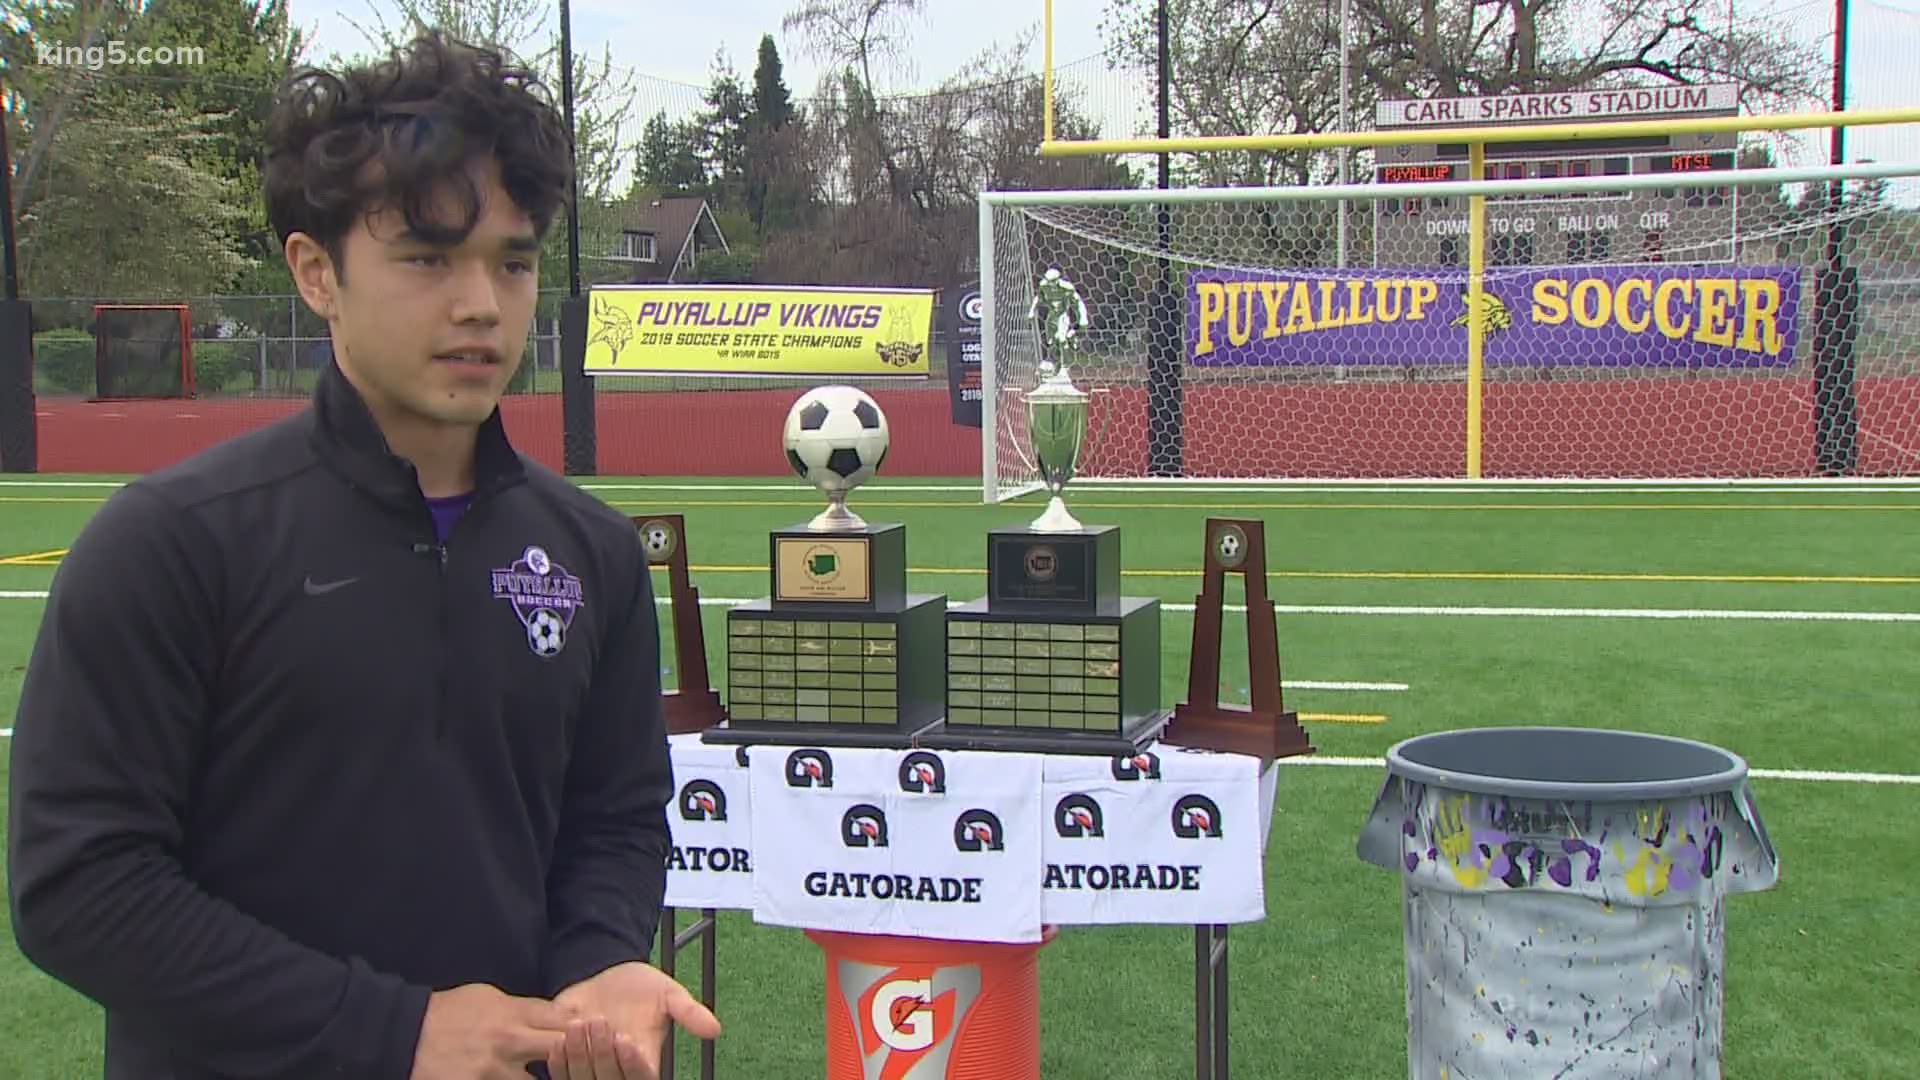 Puyallup High Senior Logan Oyama is one of the best soccer players in the state. He was named the 2019 Gatorade Soccer Player of the Year.